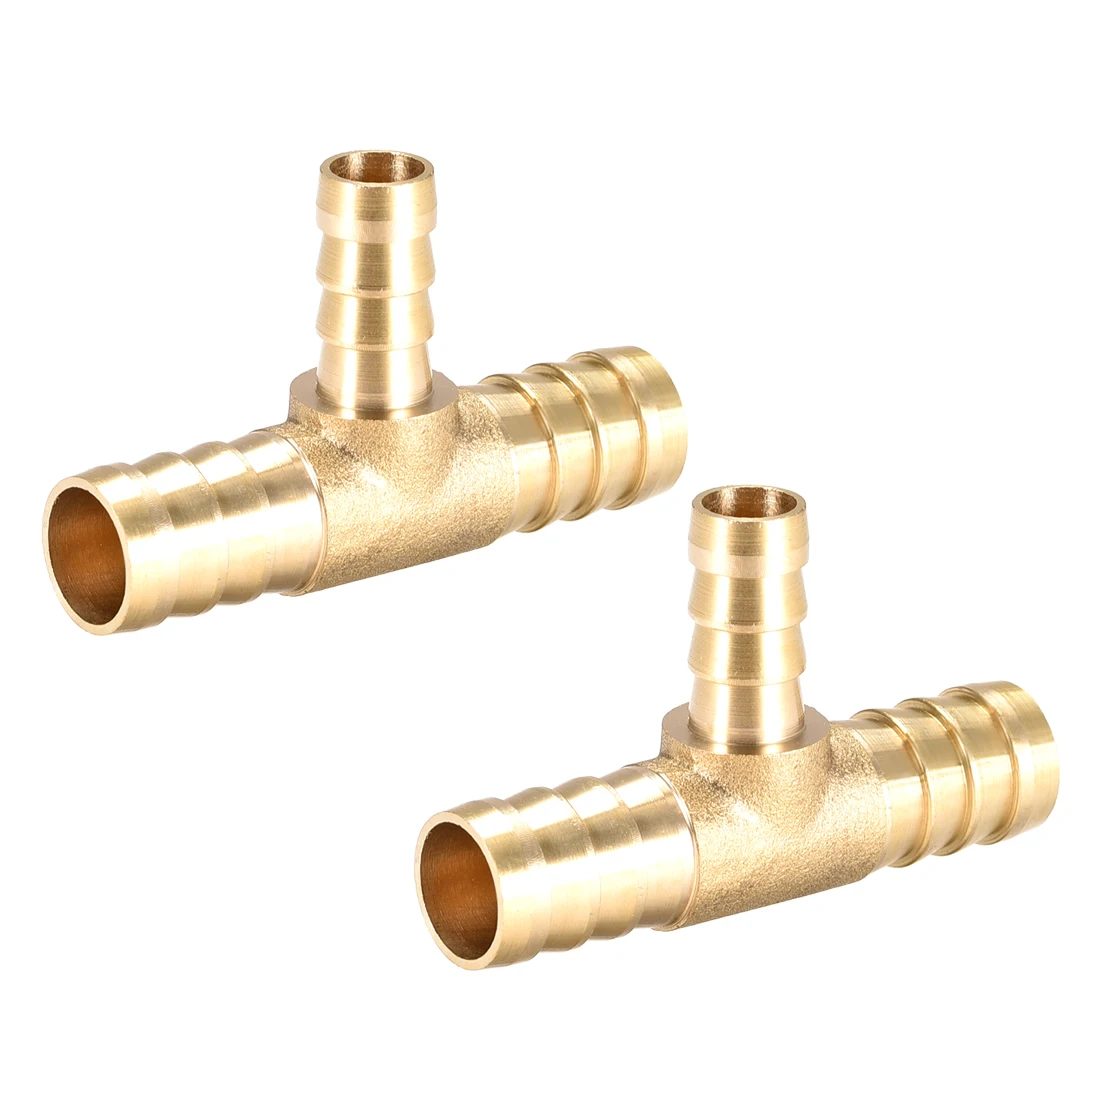 

uxcell 2pcs 10X14X10mm Brass Hose Reducer Barb Fitting Tee T-Shaped 3 Way Barbed Connector Air Water Fuel Gas Oil etc.